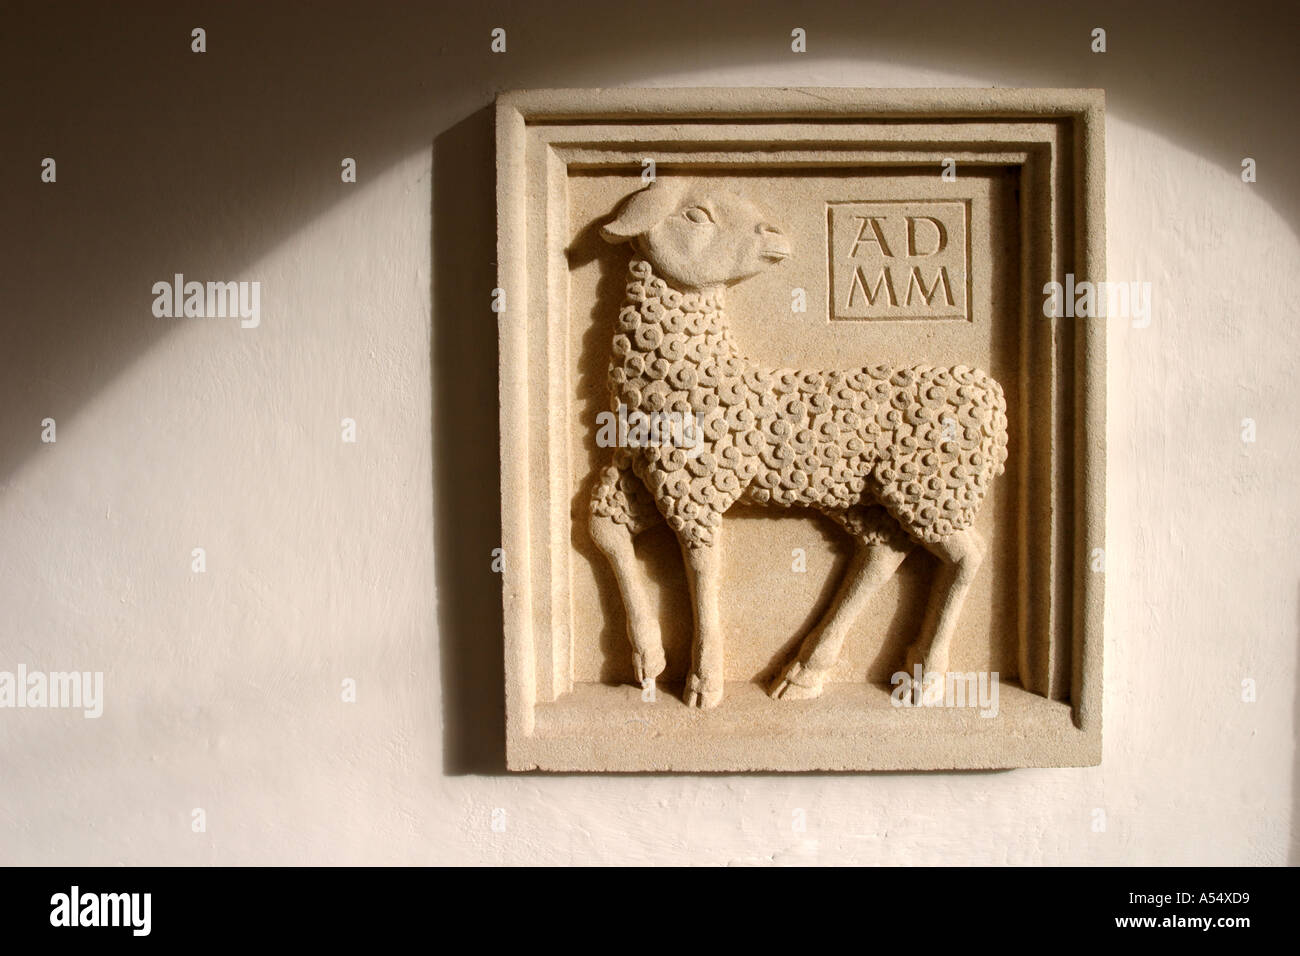 Relief sculpture to celebrate the Millennium year AD 2000 Stock Photo